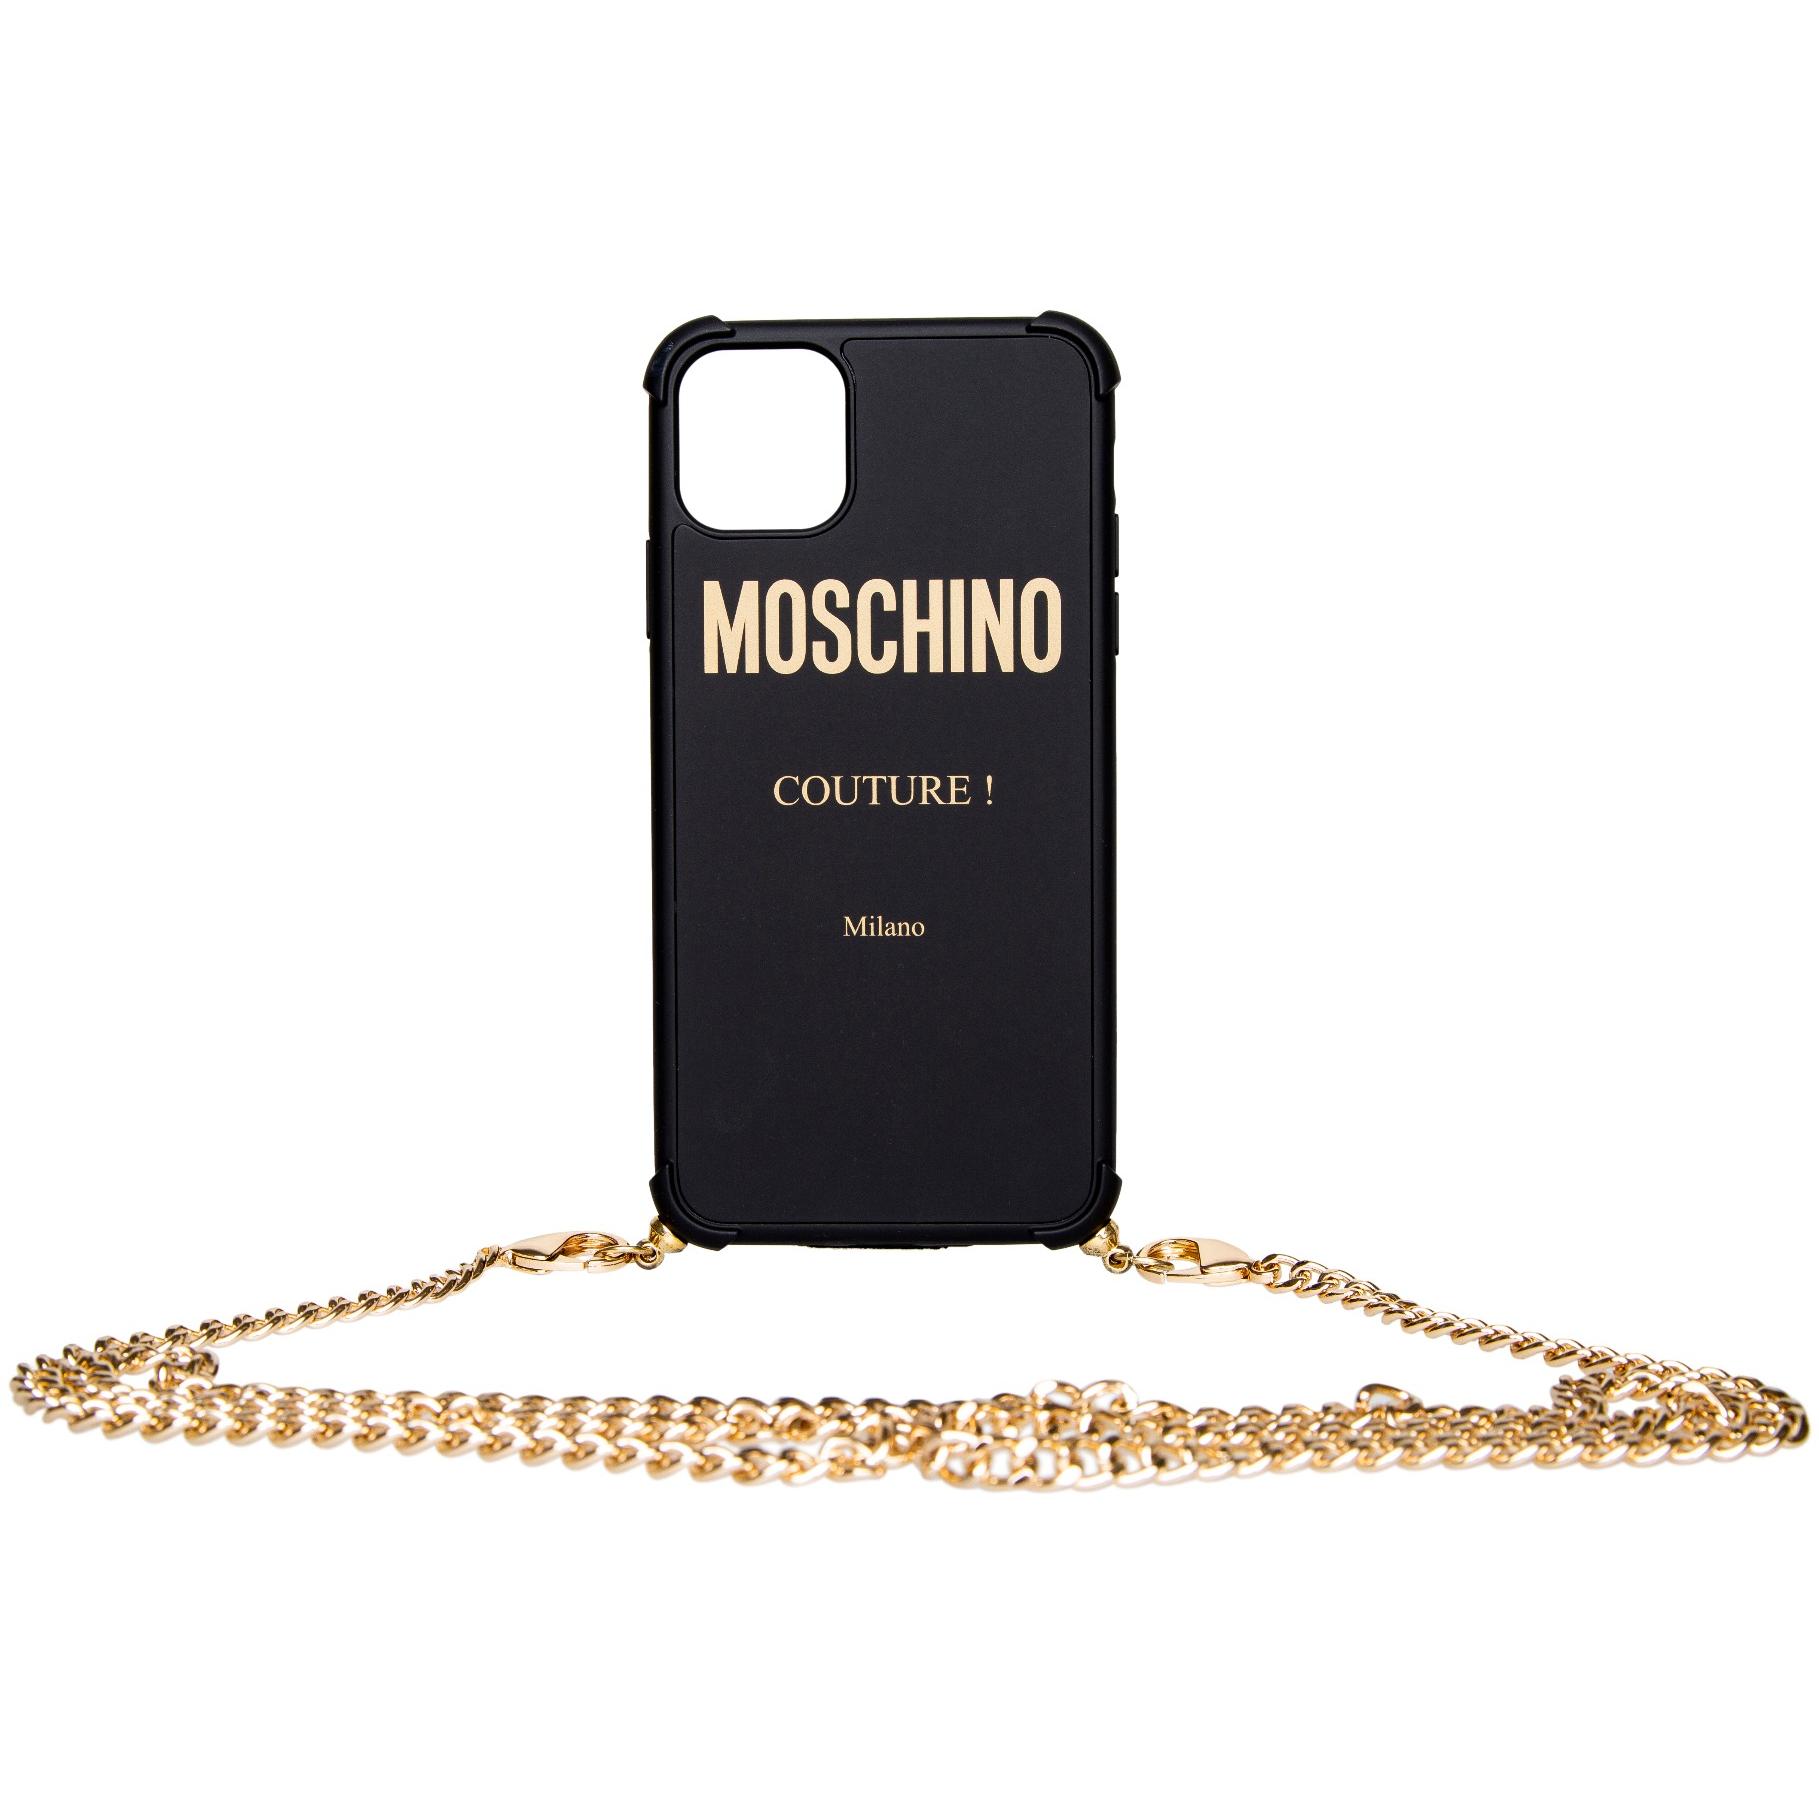 Case With Chain Strap For Iphone 11 Pro Max Popp Kretschmer Multibrand Fashion Store